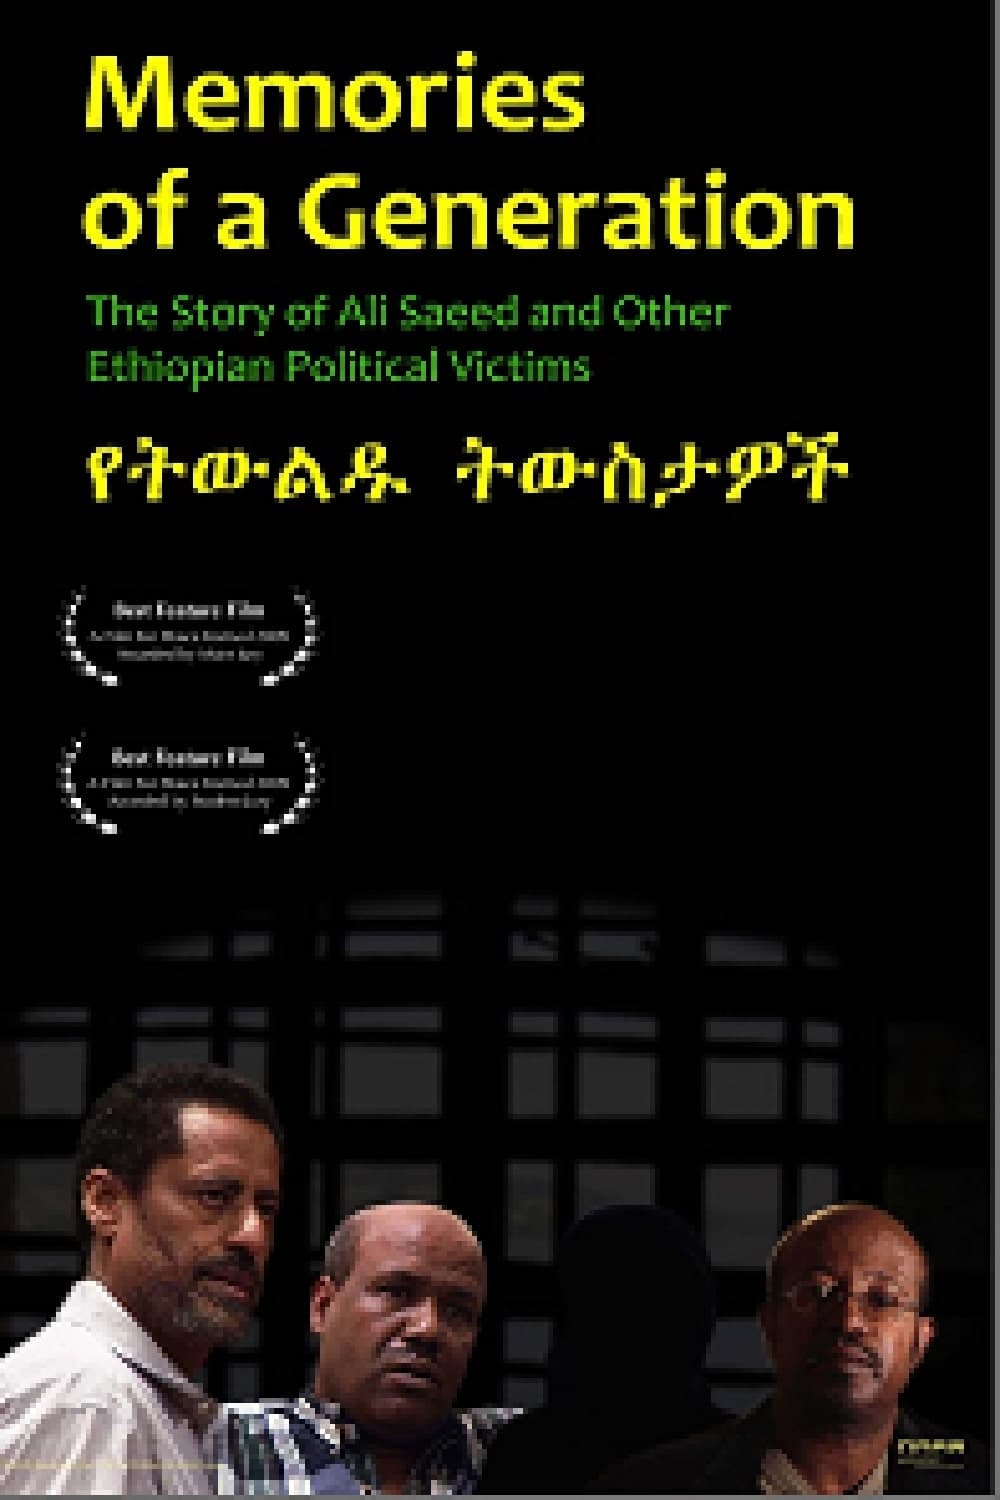 Memories of A Generation: The Story of Ali Saeed and Other Ethiopian Political Victims